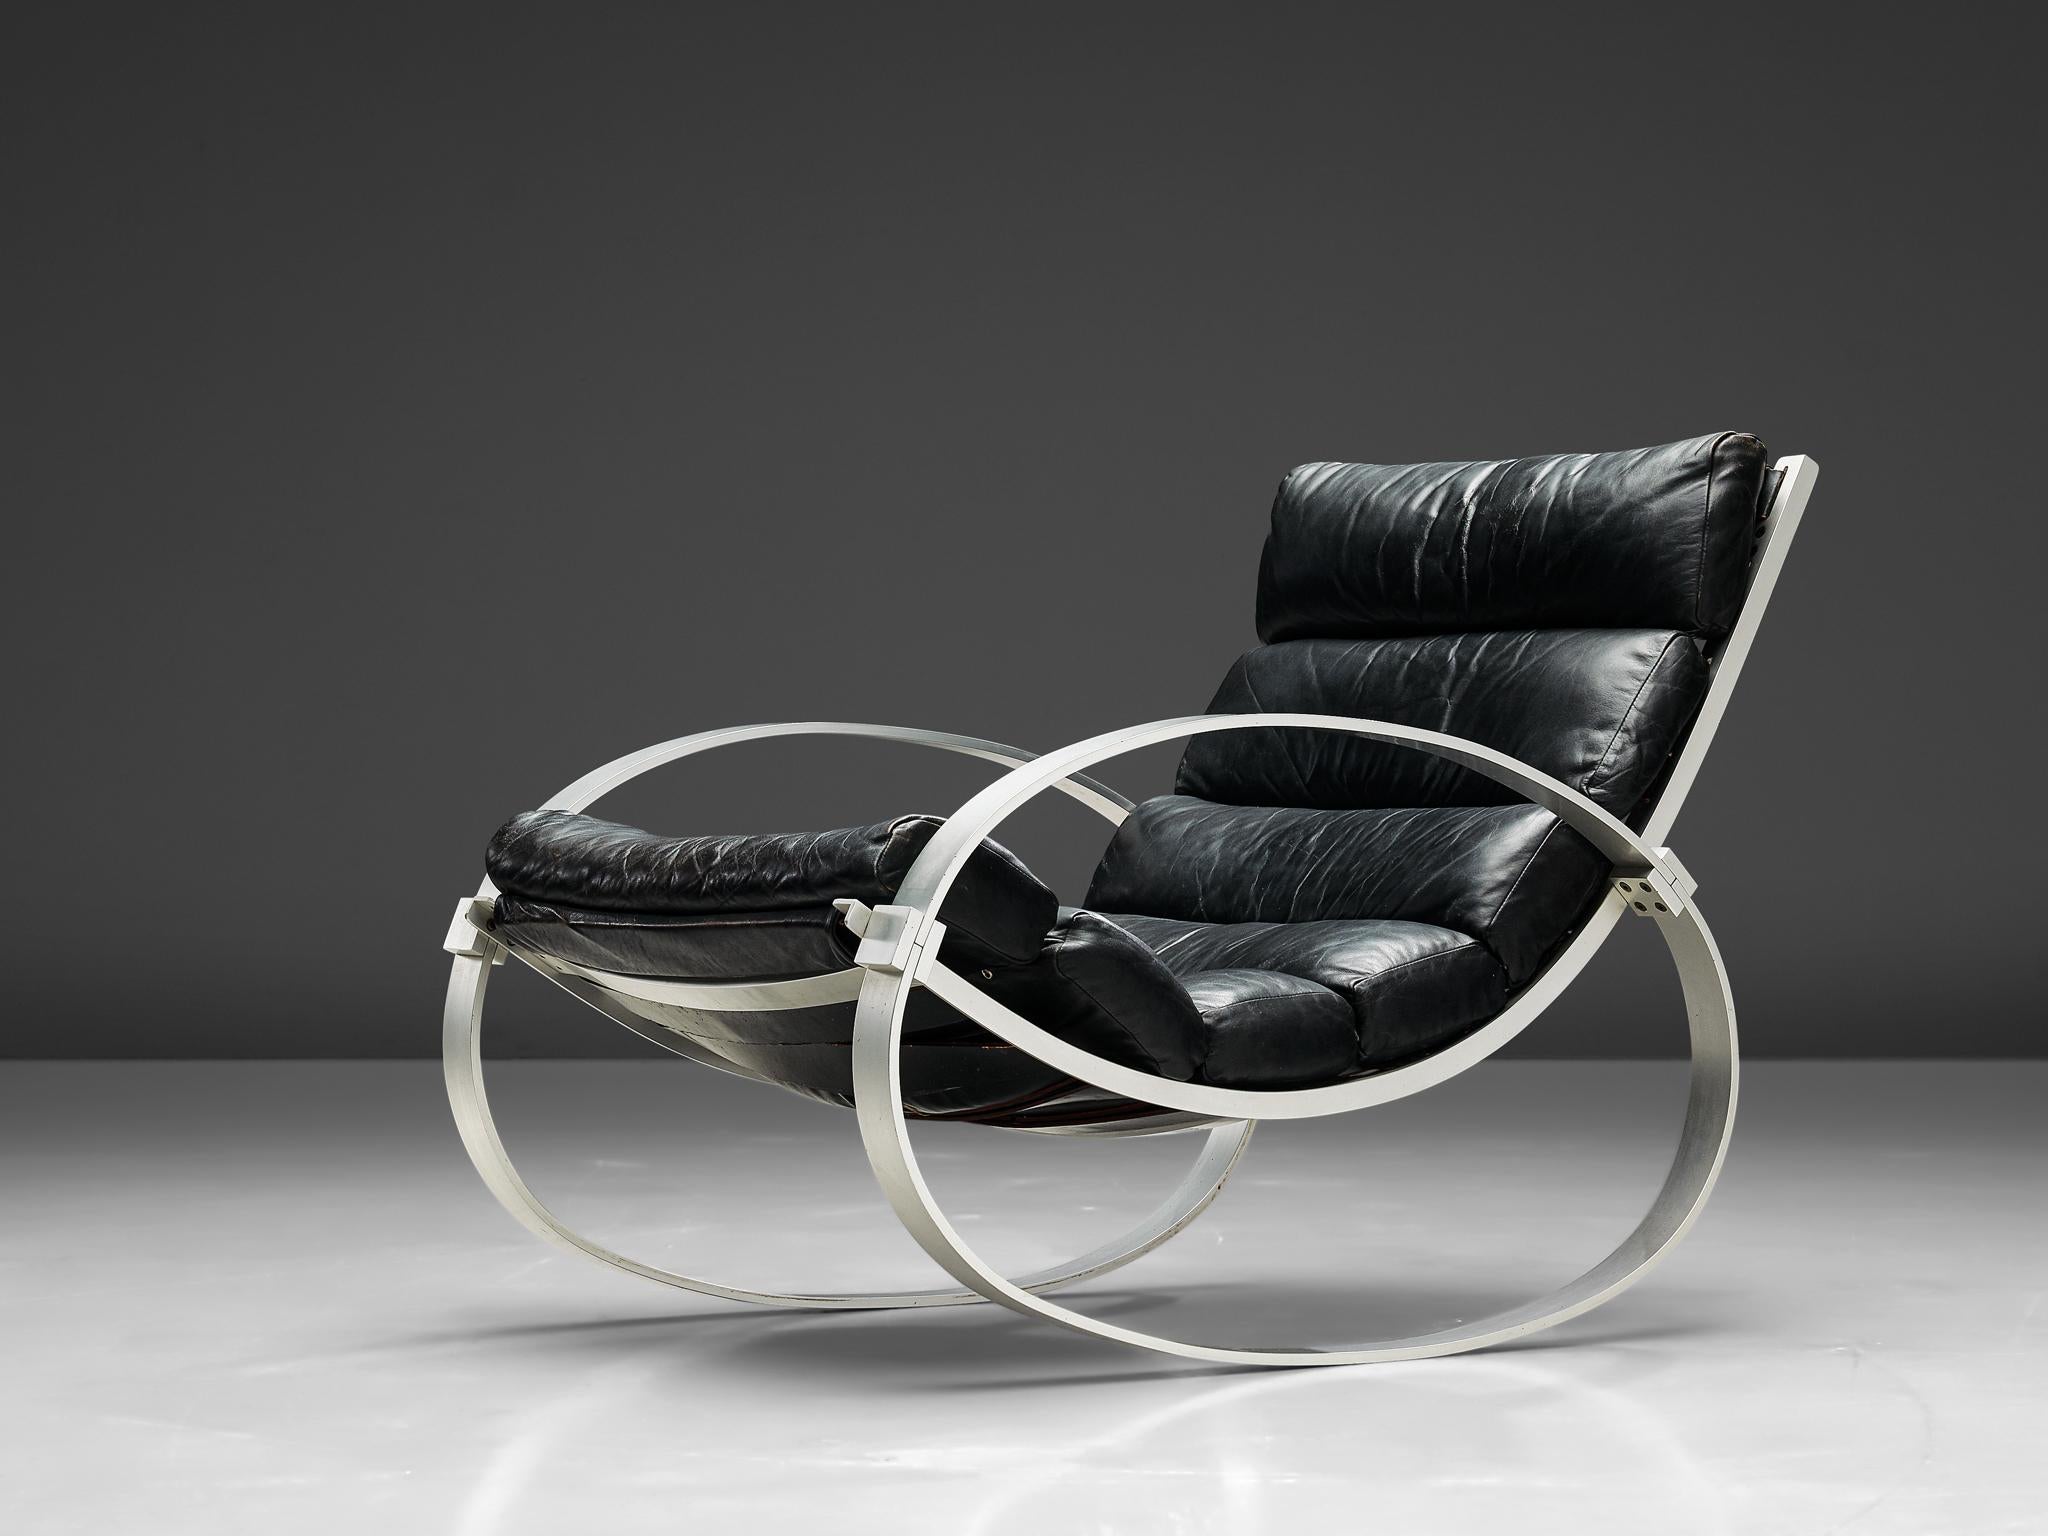 Hans Kaufeld, rocking chair, aluminium and leather, Germany, 1970s.

Modernist rocking lounge chair with matching ottoman designed by Hans Kaufeld, Germany features its original black leather rolled upholstery with brushed steel frame.

